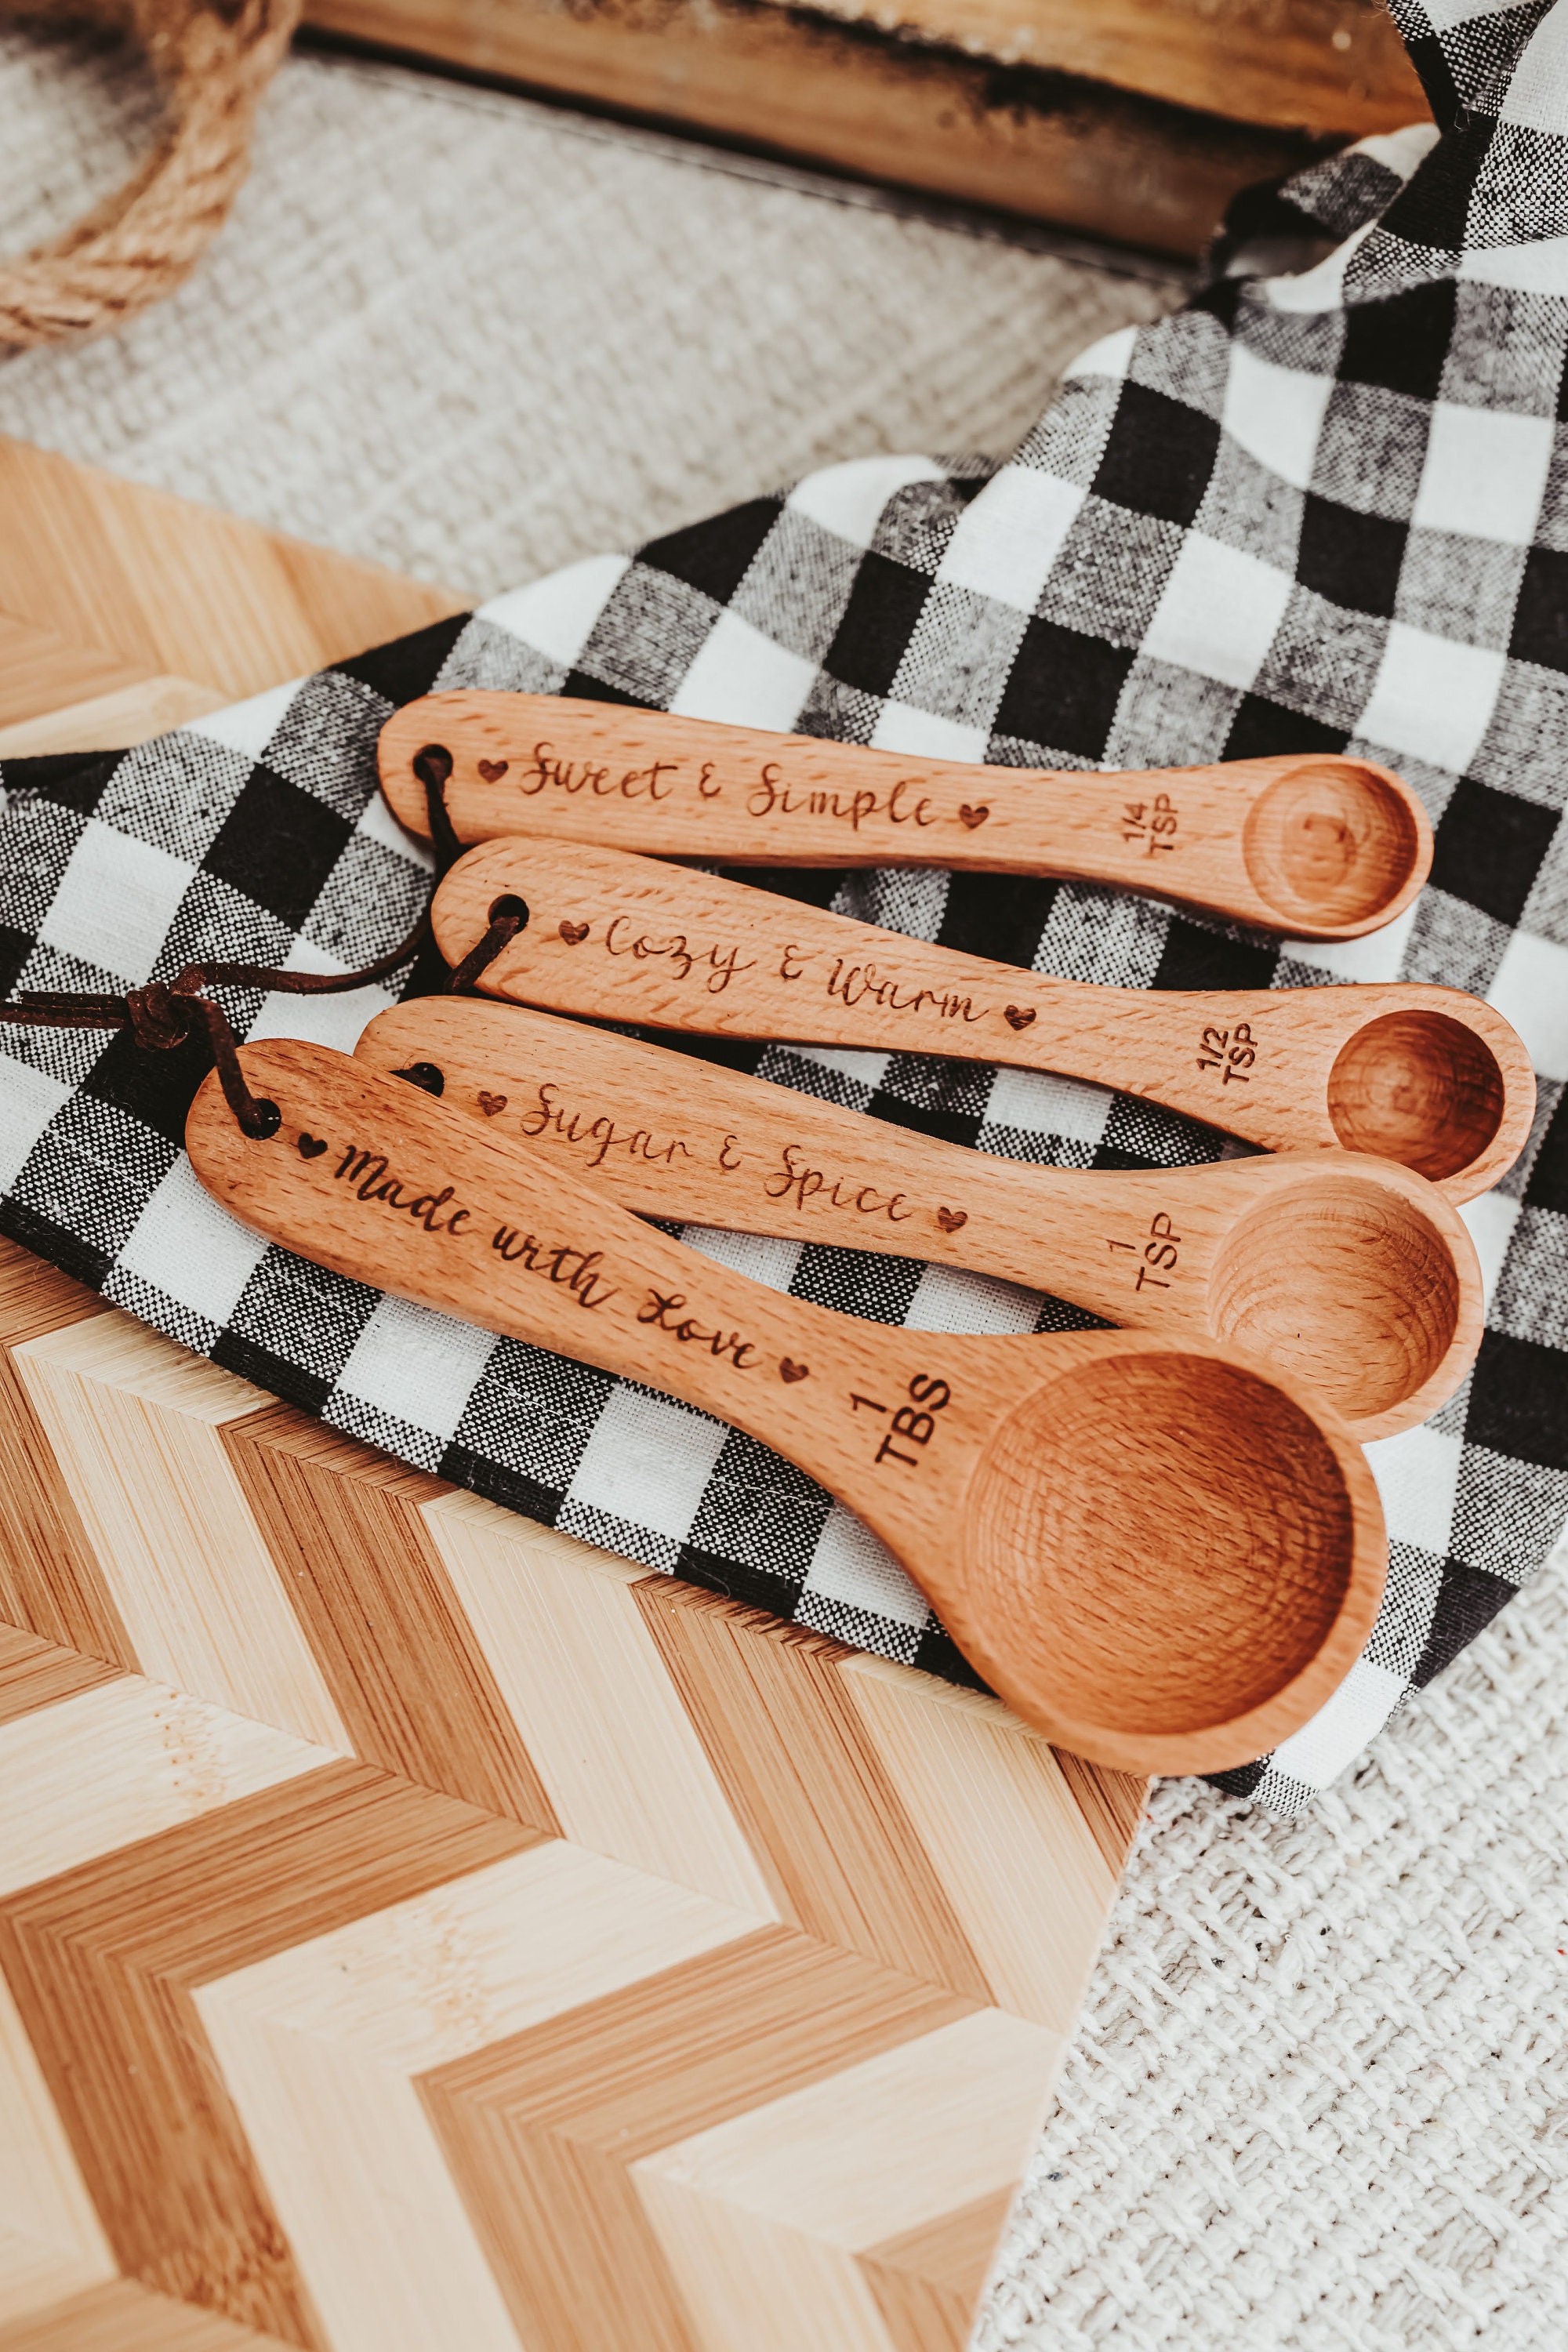 Wooden Measuring Cups, Measuring Spoons, Baking Gifts, Mom Christmas Gift  From Daughter, Mother in Law Christmas Gift, 